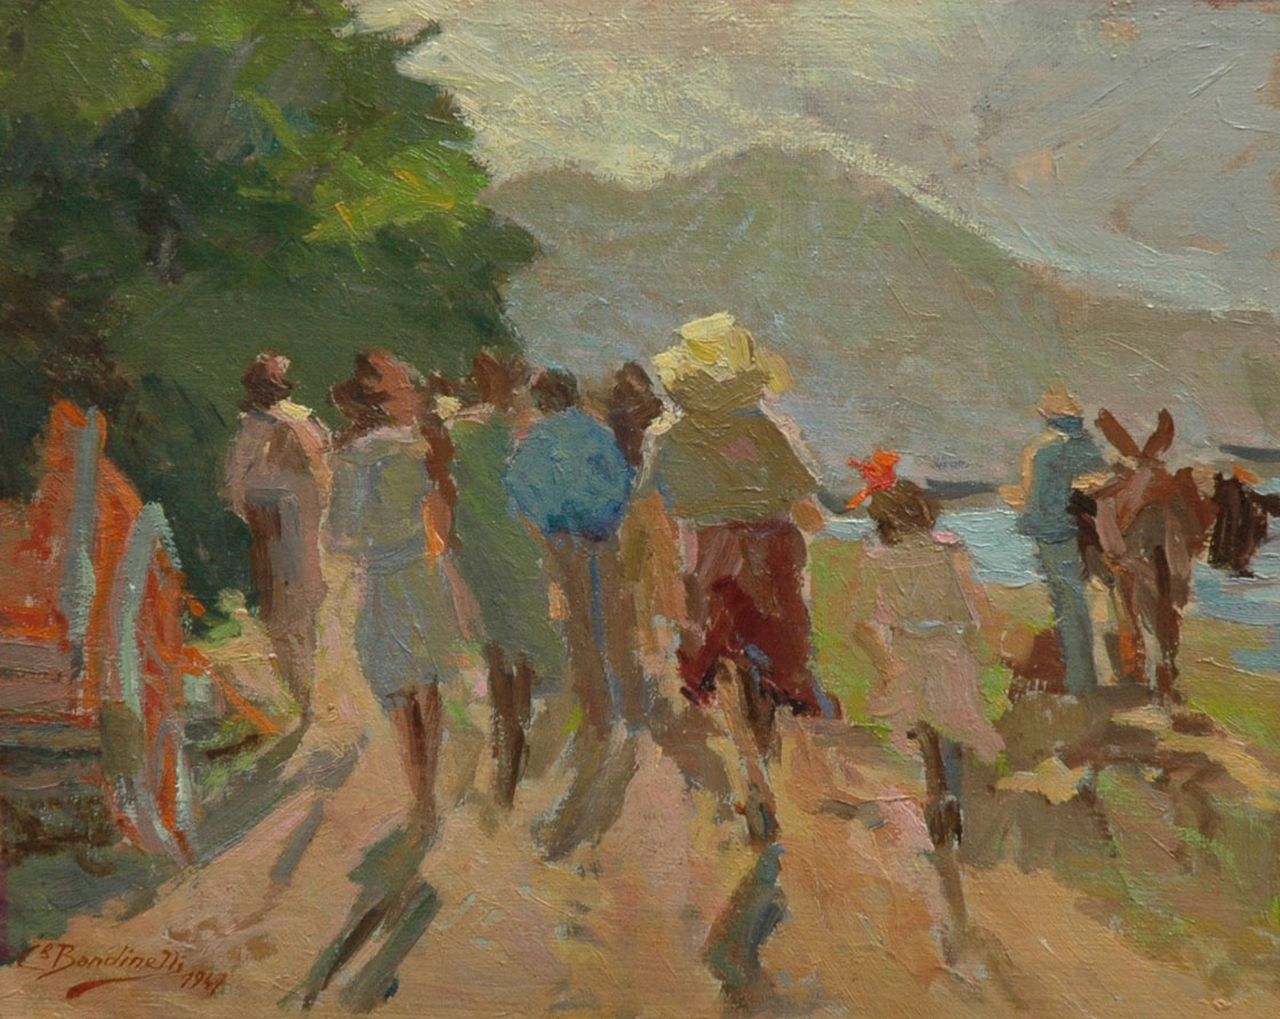 Bandinelli A.  | Aldo Bandinelli, A walk in the countryside, oil on canvas laid down on board 25.5 x 31.5 cm, signed l.l. and with monogram on the reverse and dated 1947